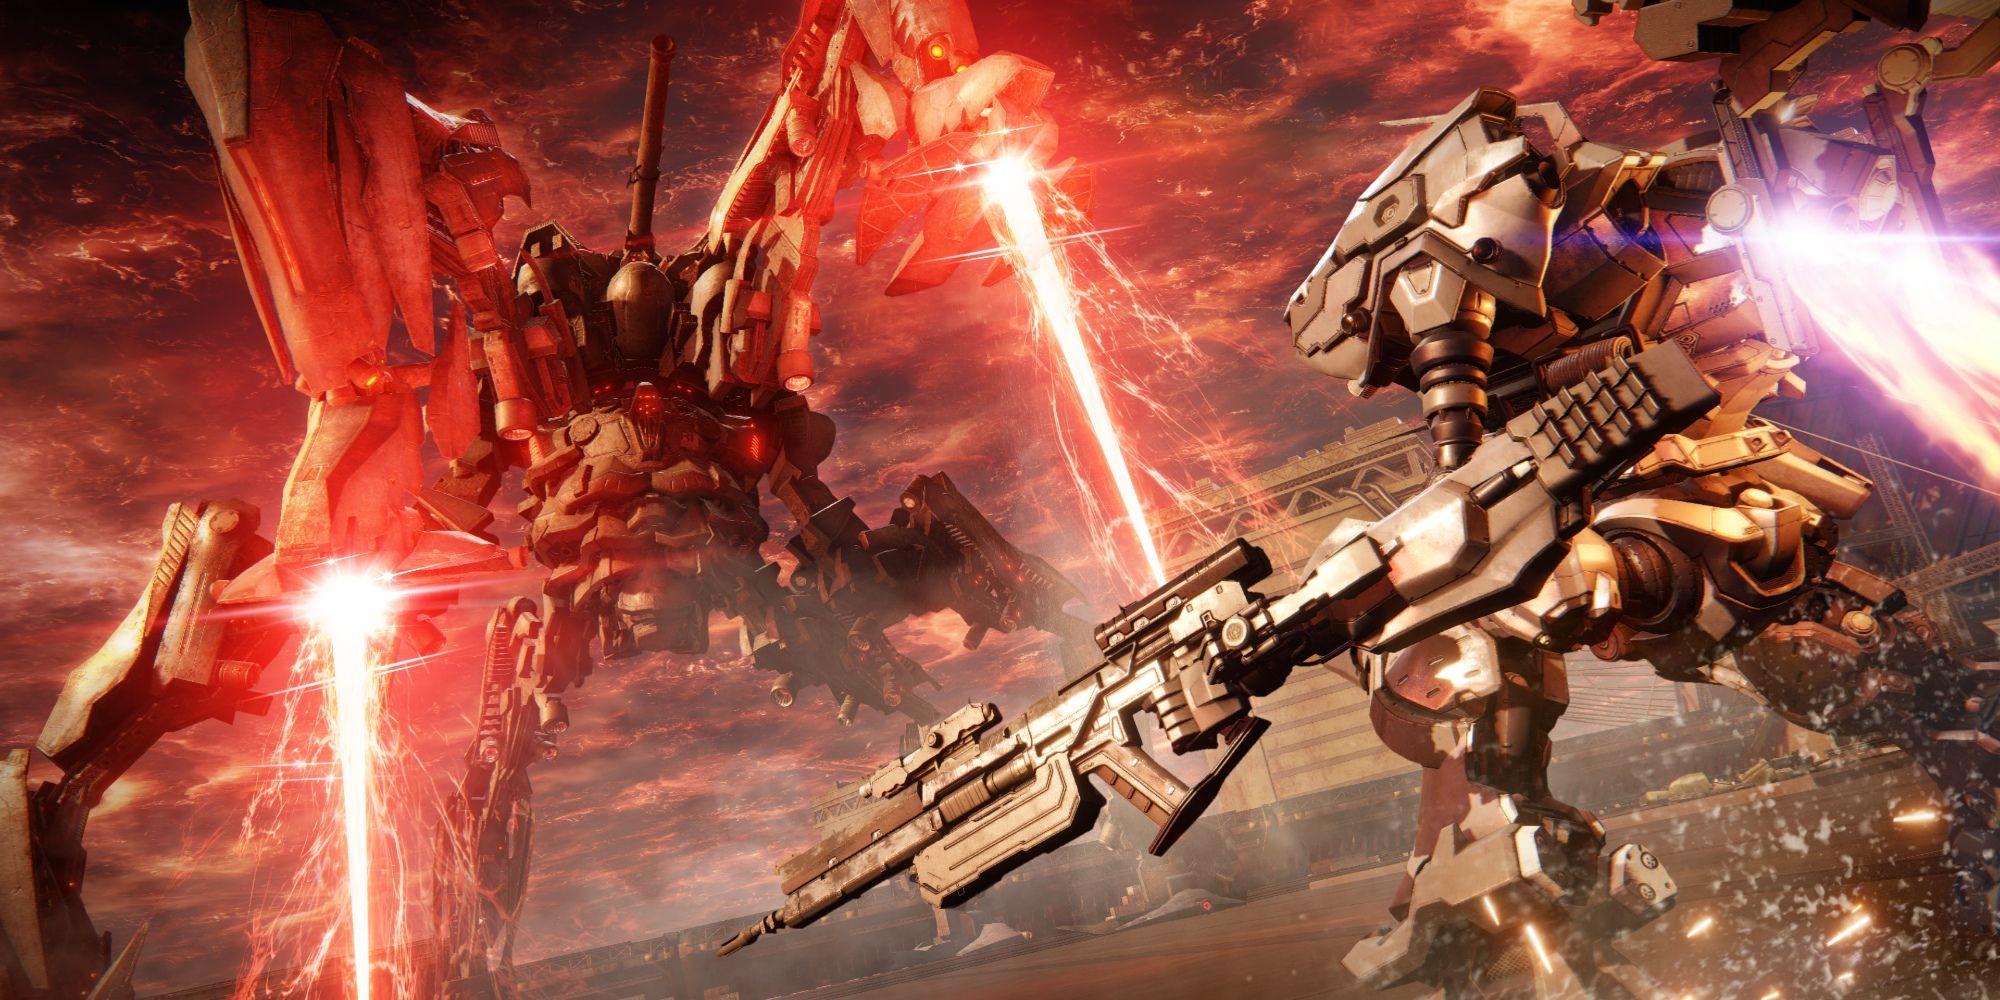 A mech equipped with a large assault rifle battles a massive boss with red lasers emitting from its legs.